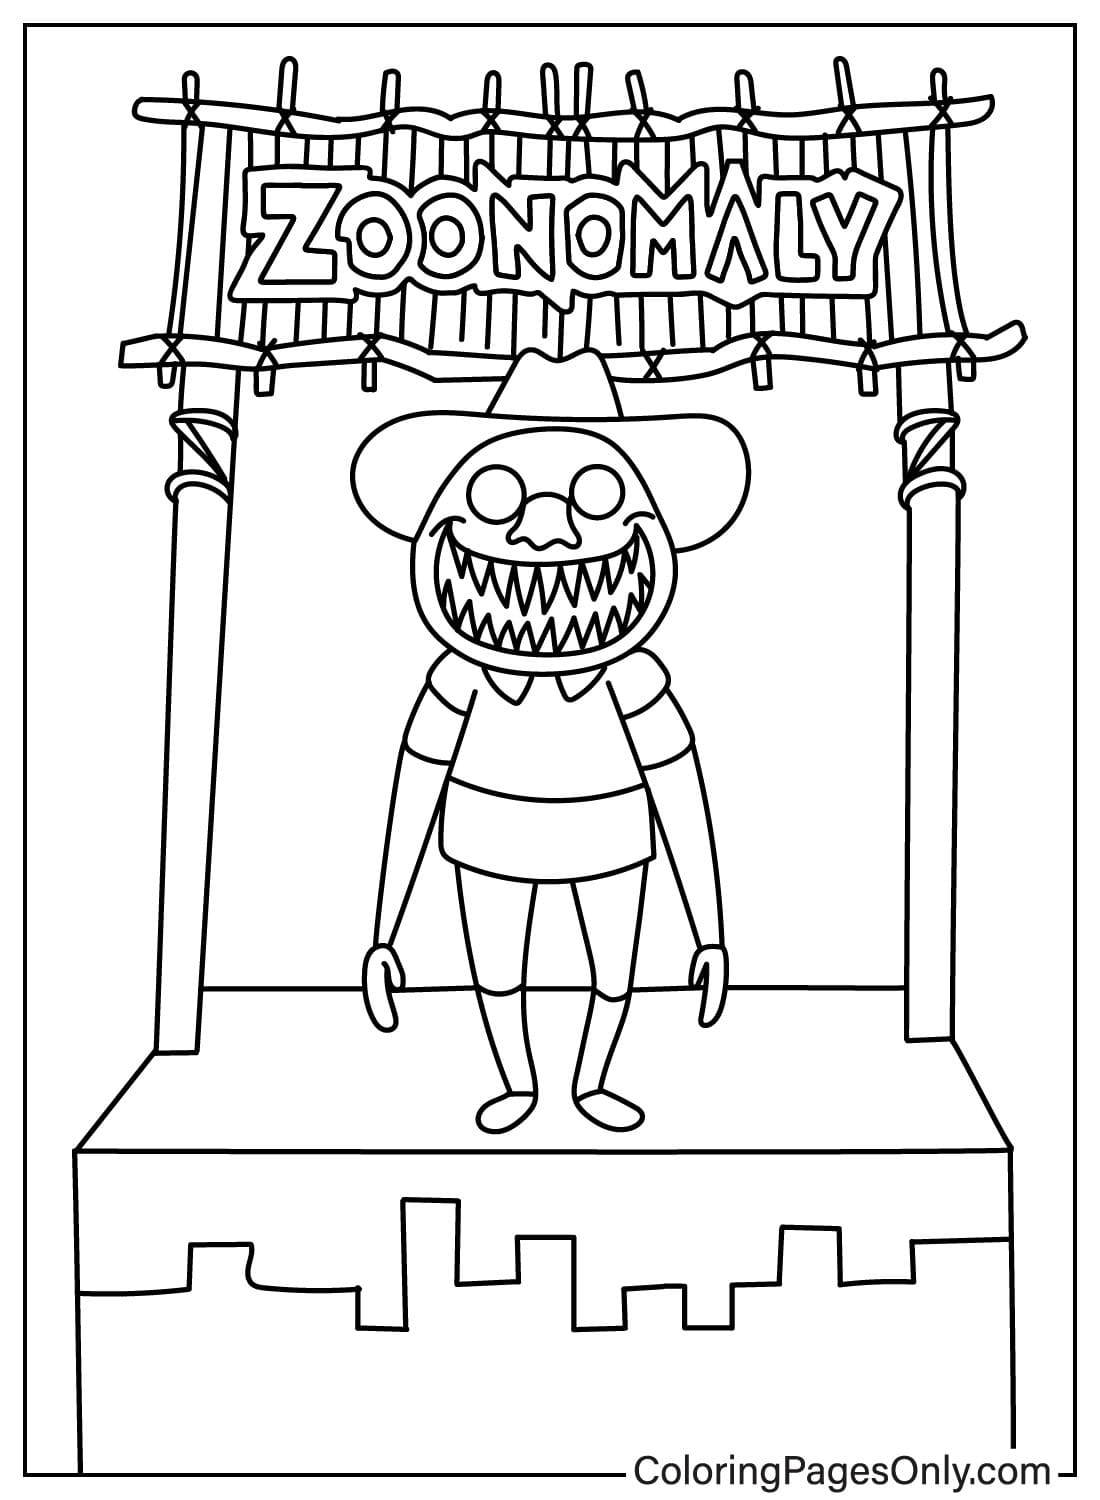 Zoonomaly Images to Color from Zoonomaly